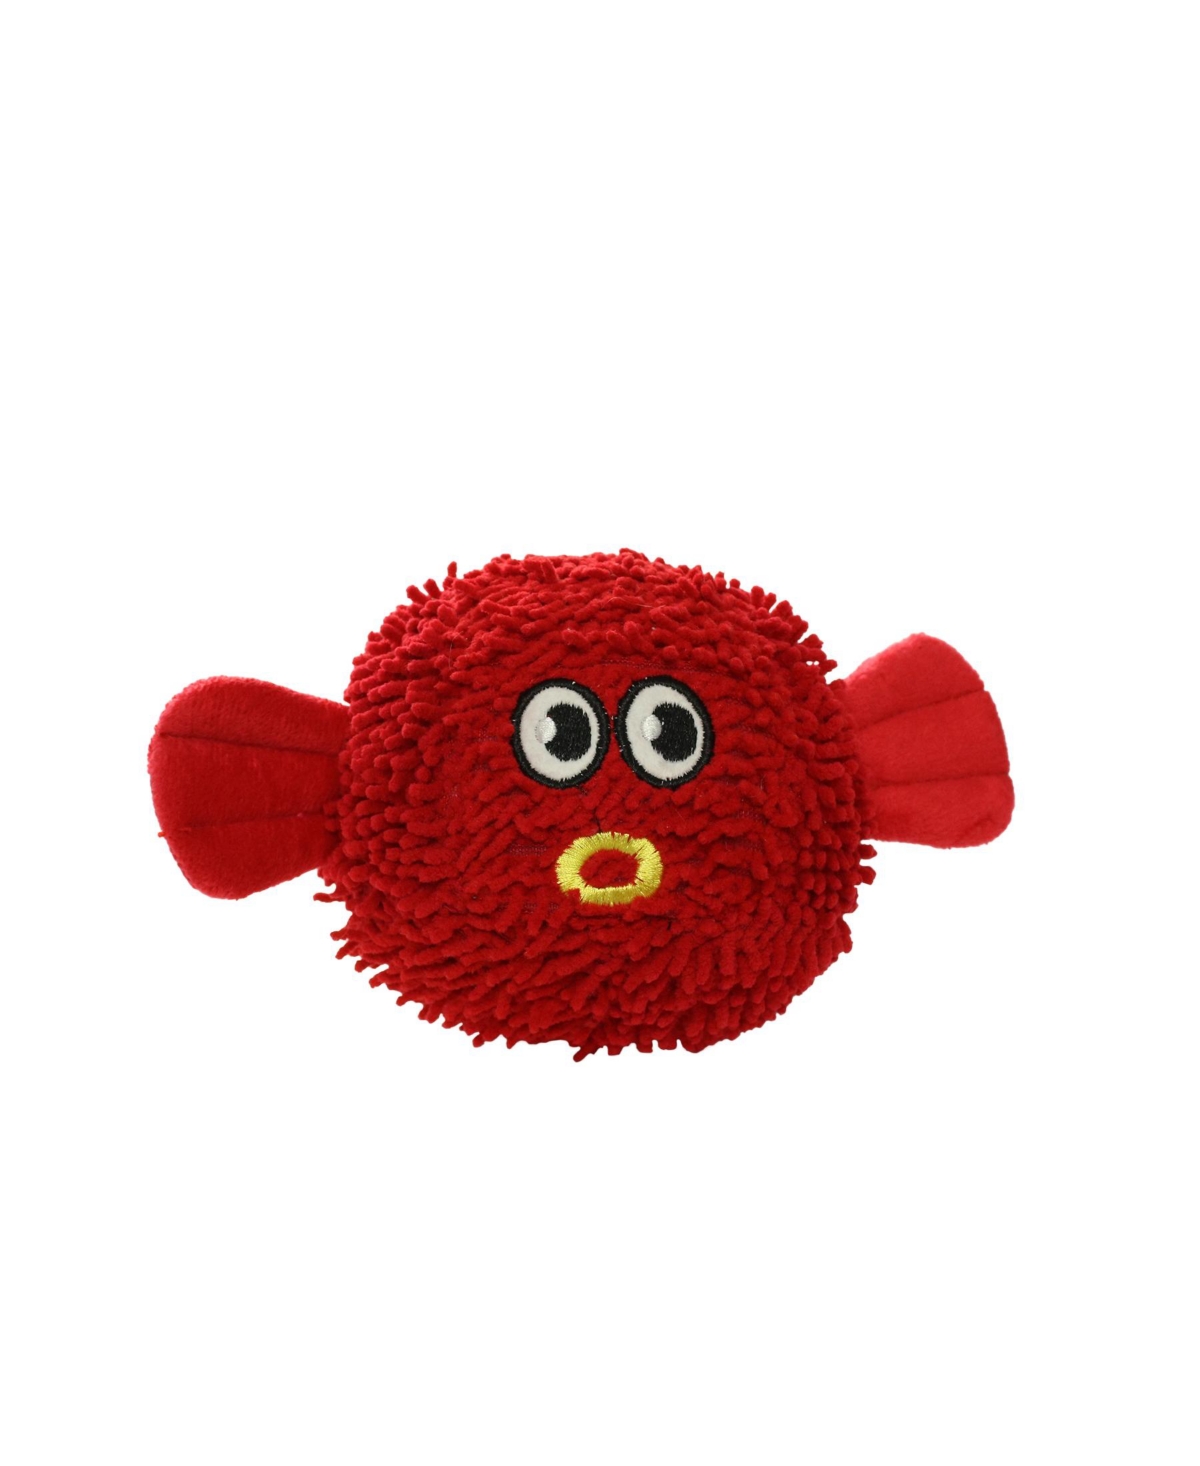 Microfiber Ball Med Blowfish, Dog Toy - Red